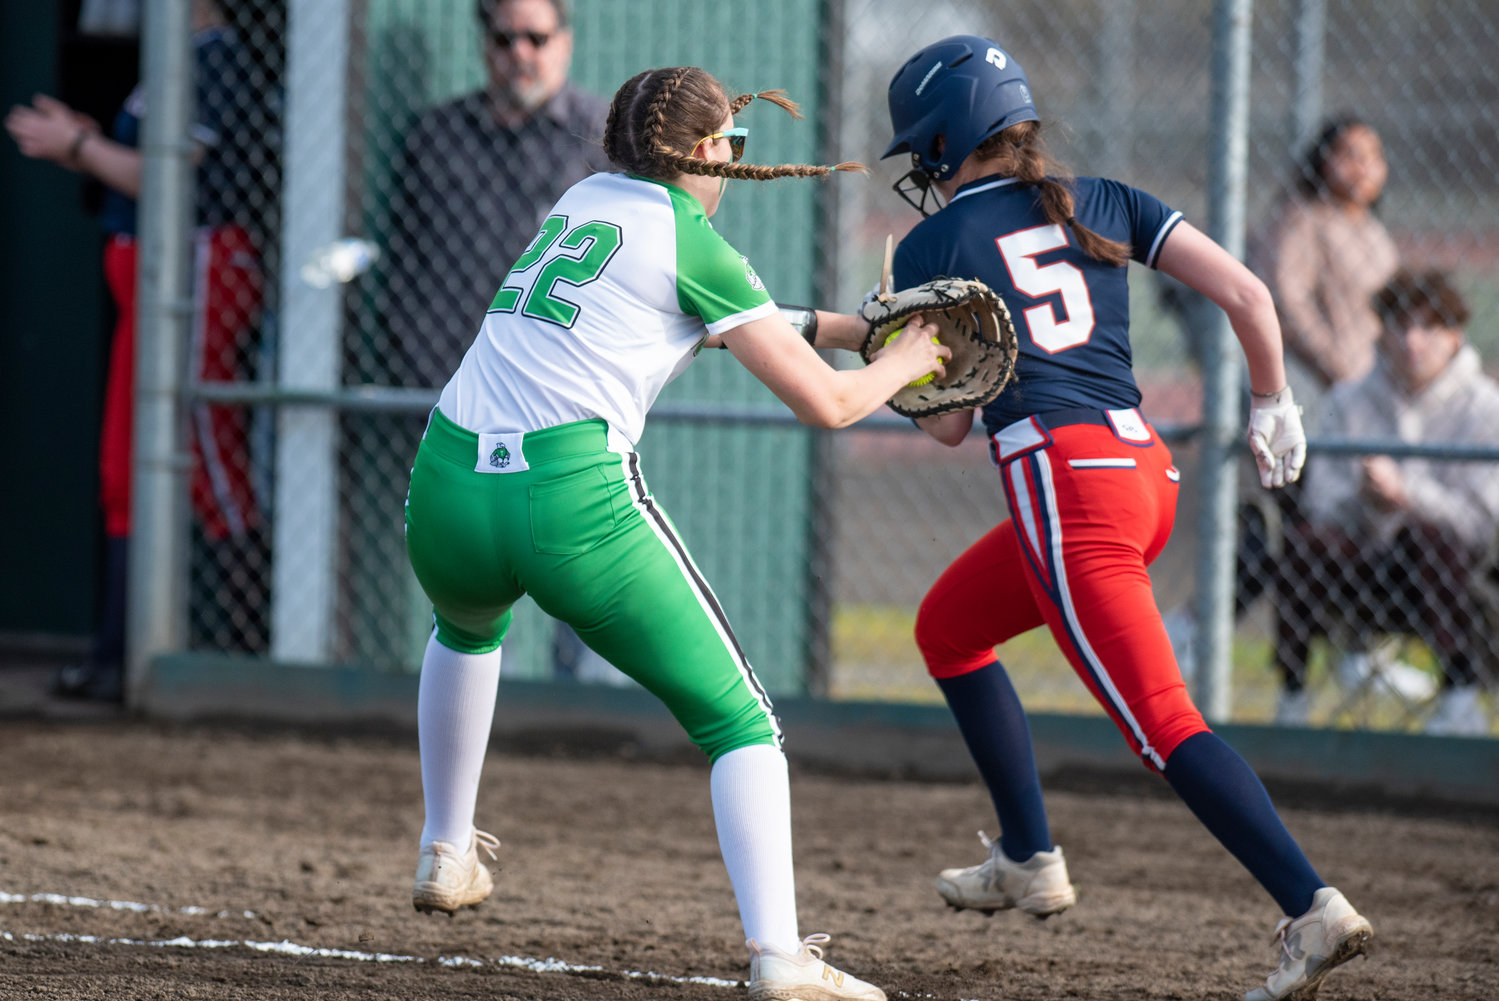 Tumwater first baseman Megan Paull (22) attempts to tag out Black Hills' Alexa Robles (5) during a game at Tumwater High School on March 25.